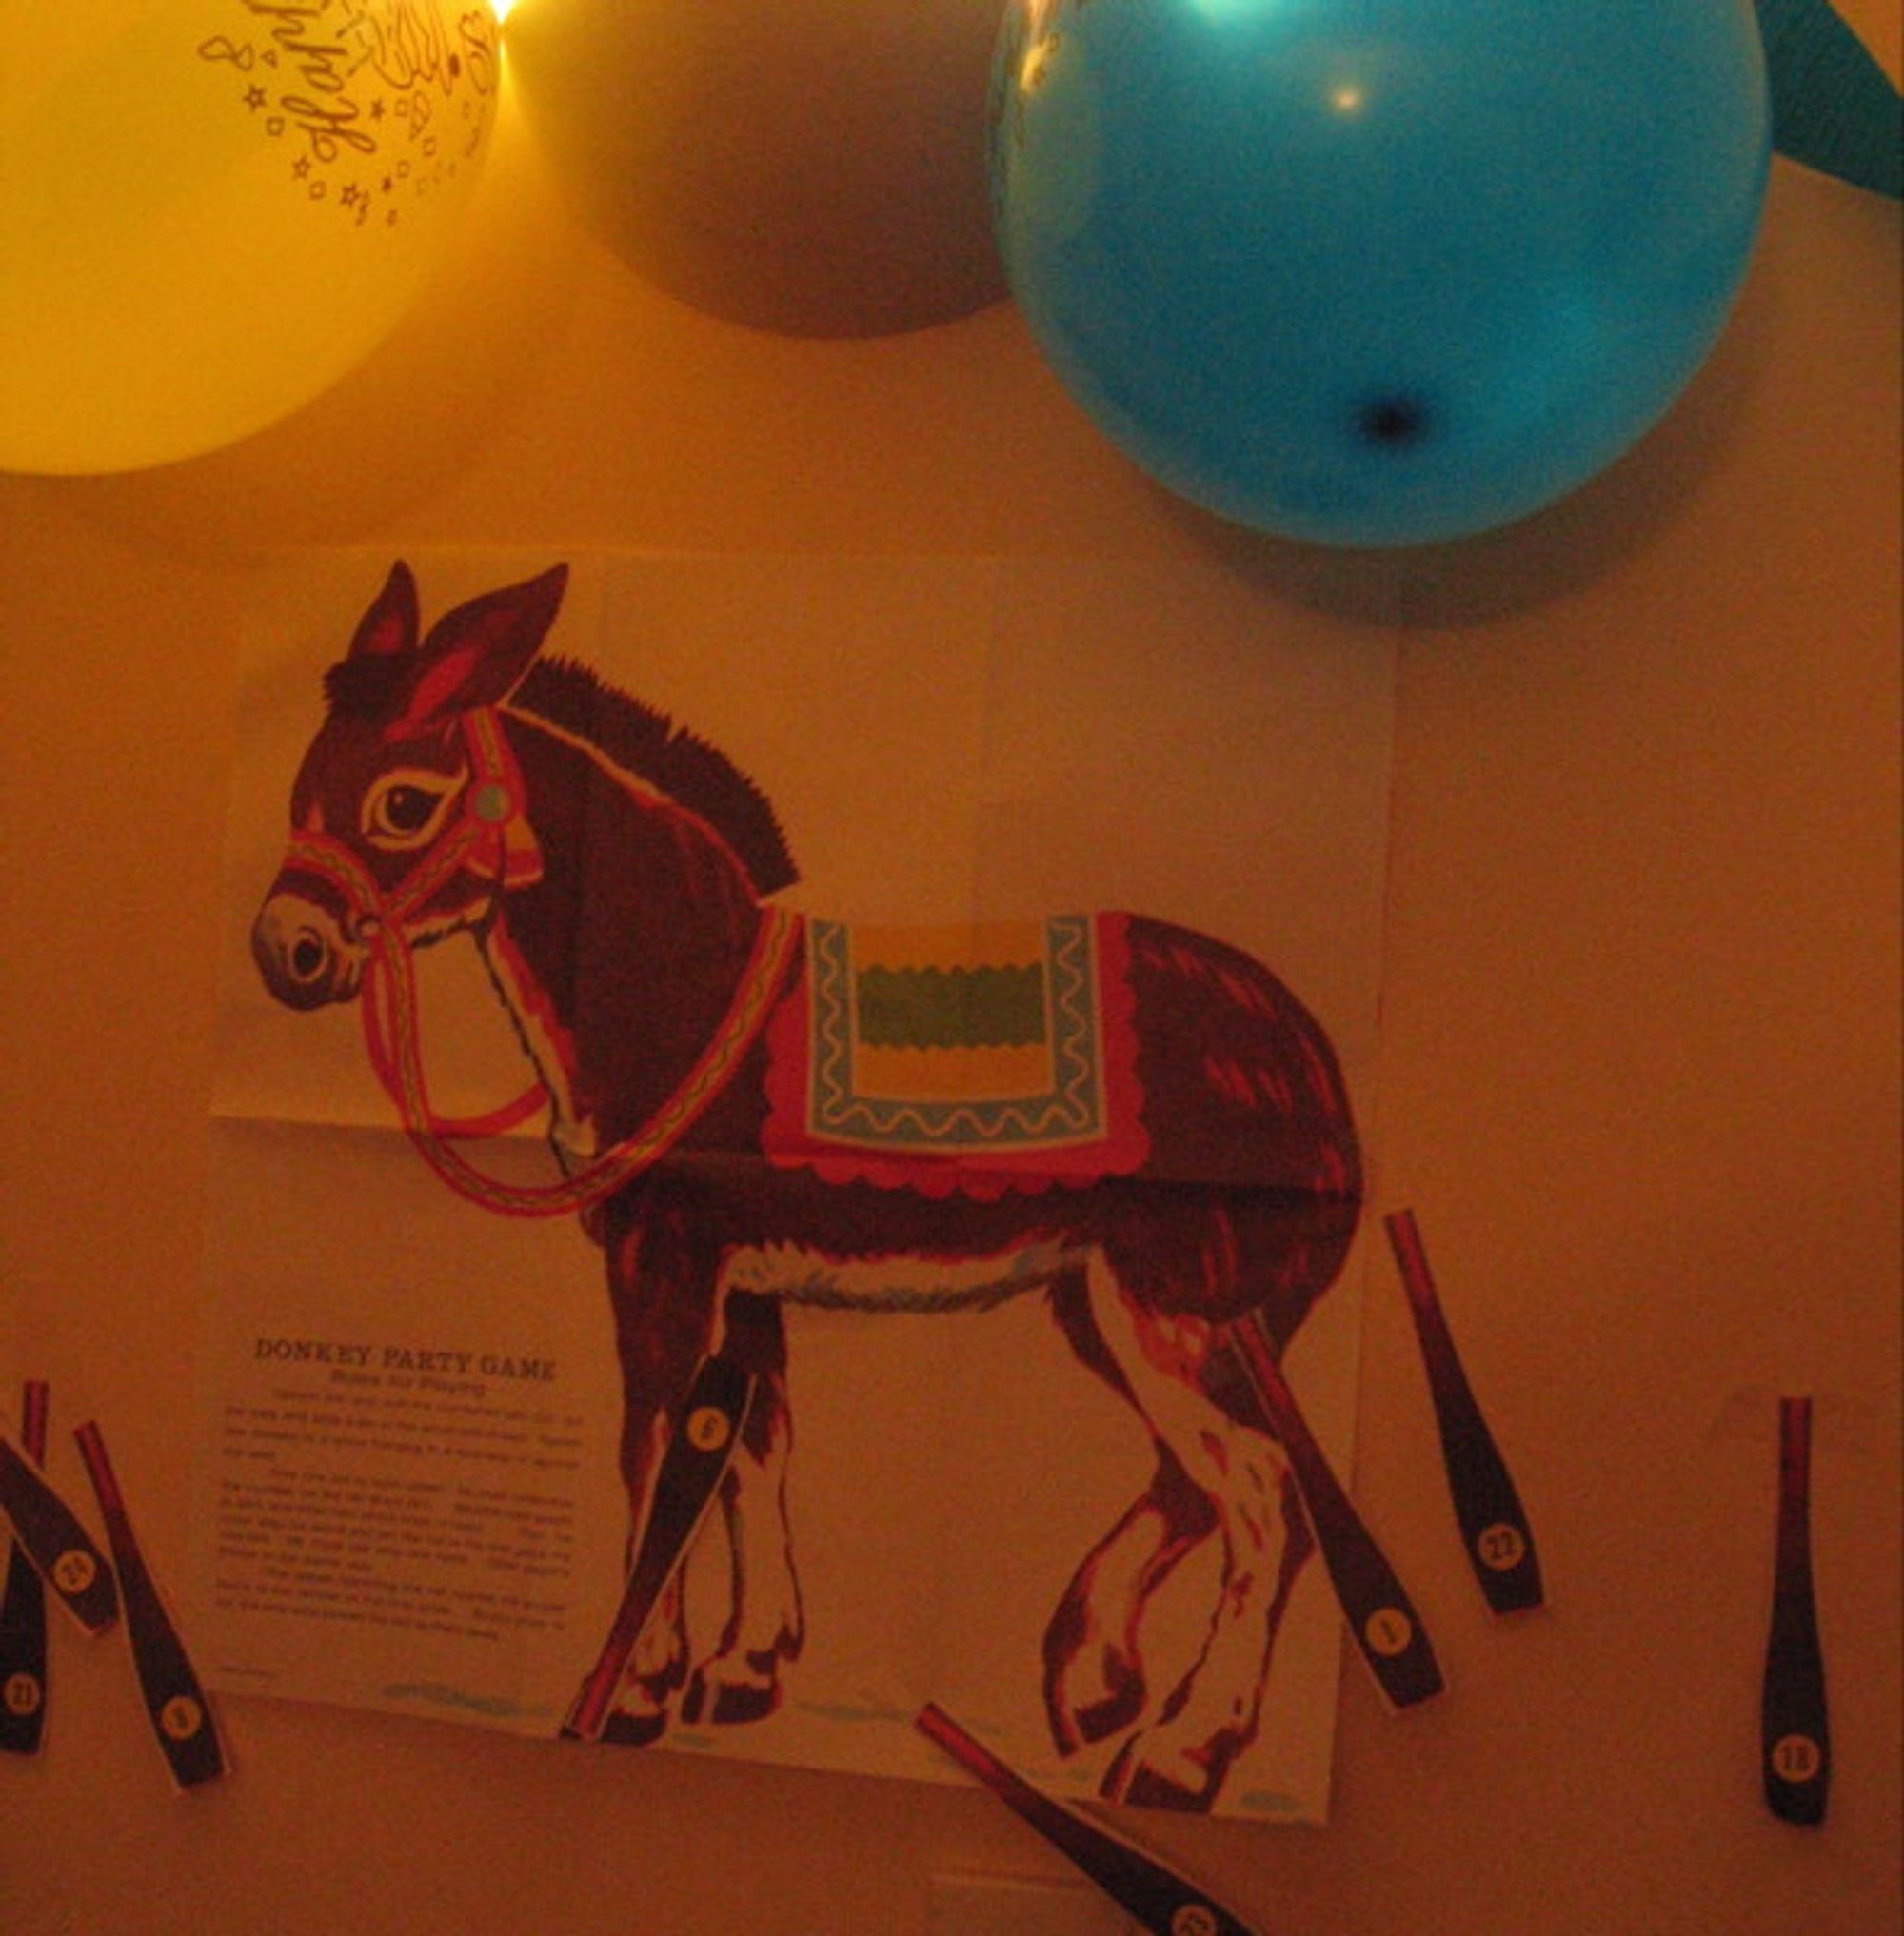 A picture of a pin-the-tail-on-the-donkey bathed in orange light. The donkey is surrounded by multi-coloured balloons.